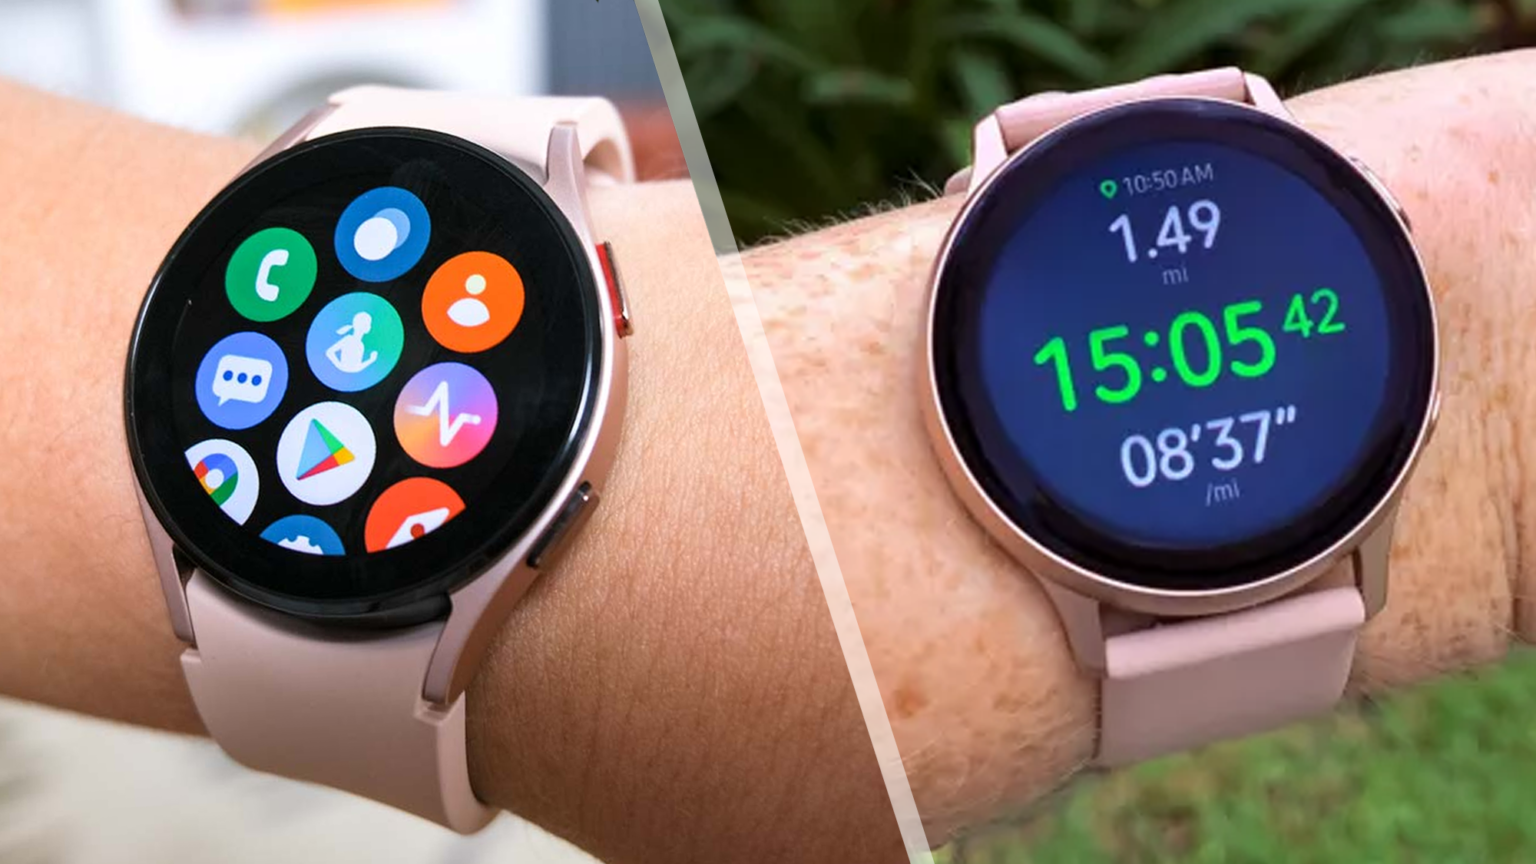 Samsung Galaxy Watch 4 vs. Galaxy Watch Active 2: What are the